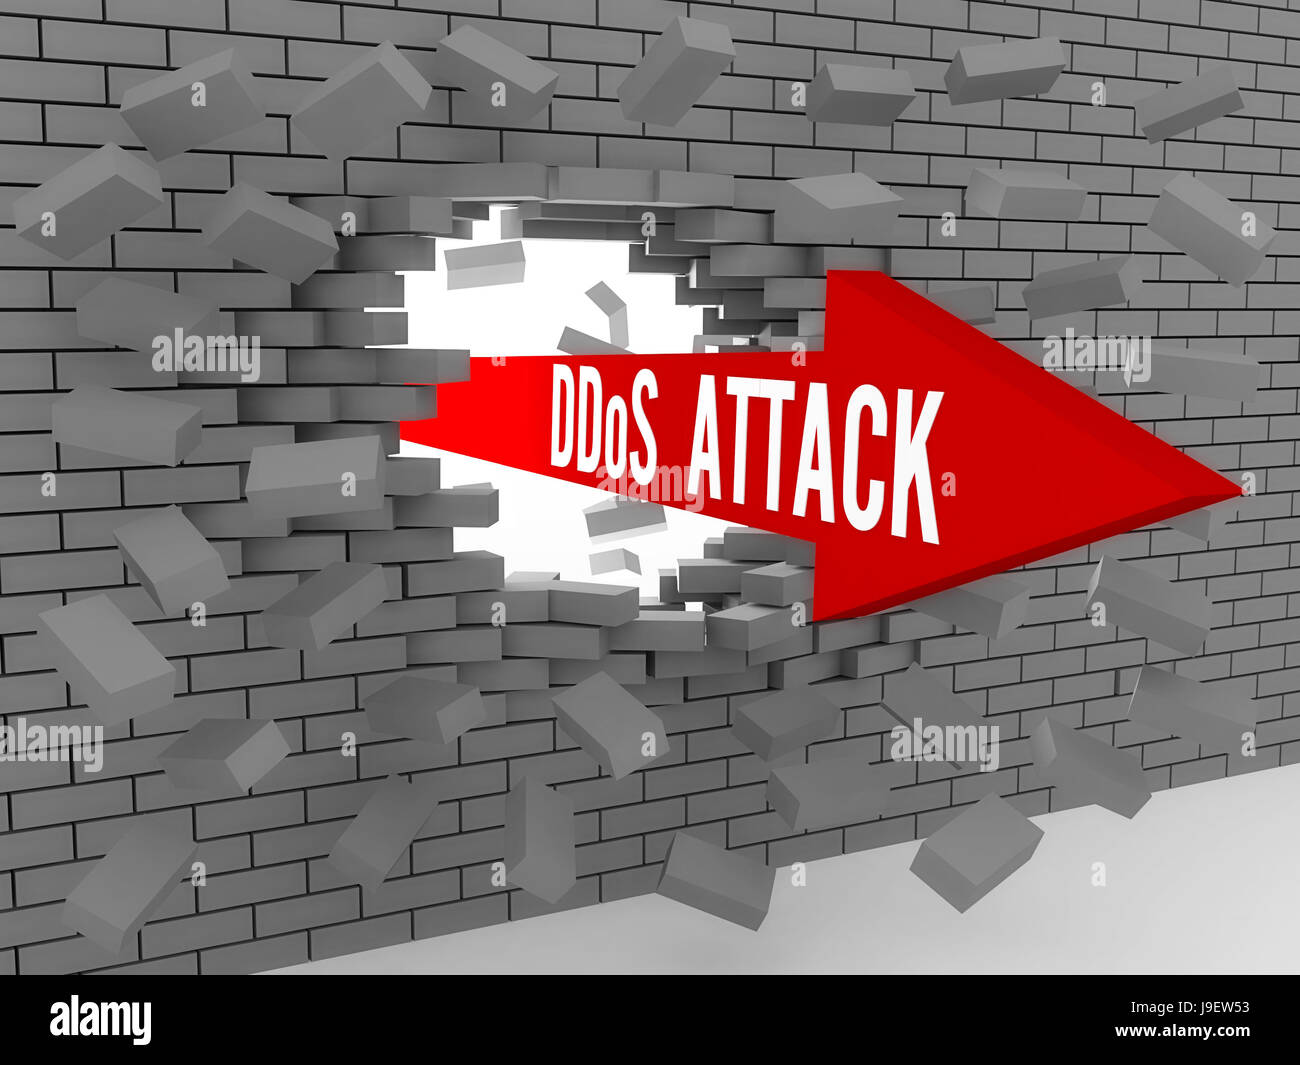 Arrow with words DDos Attack breaking brick wall. Concept 3D illustration. Stock Photo